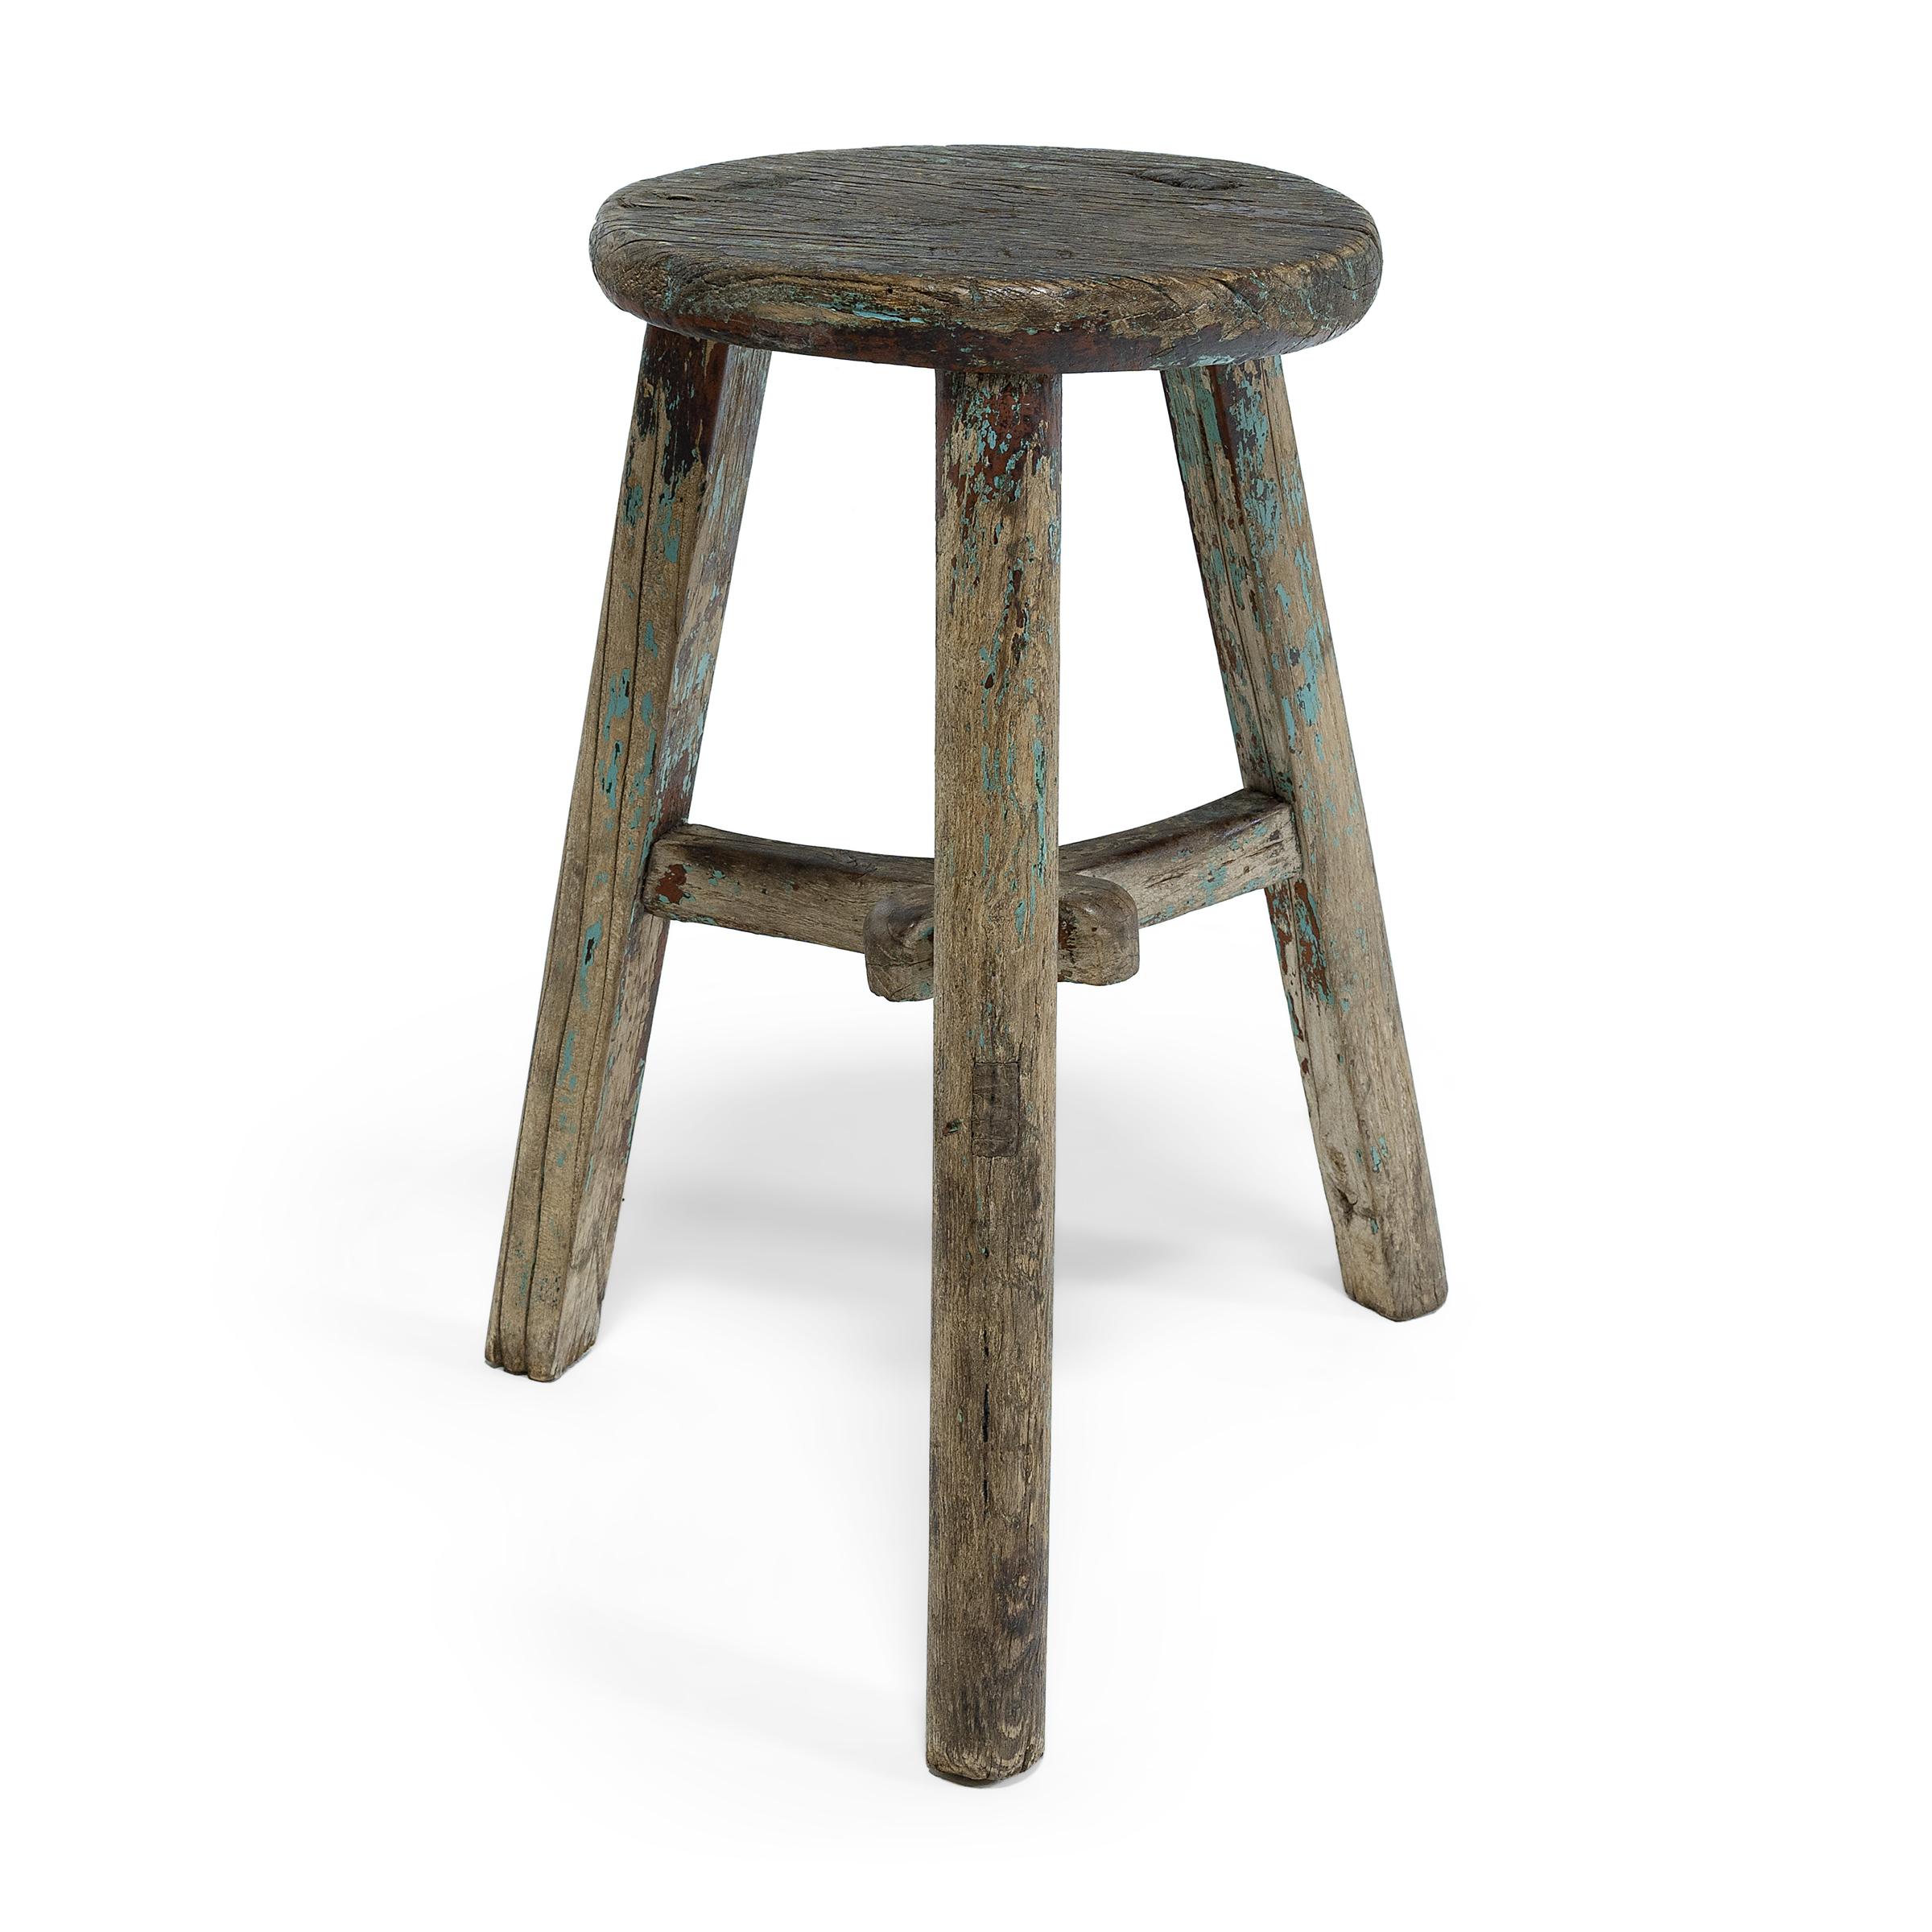 This rustic stool from Shanxi province charms with its simple form and fantastic texture. The wooden stool embraces the notion of 